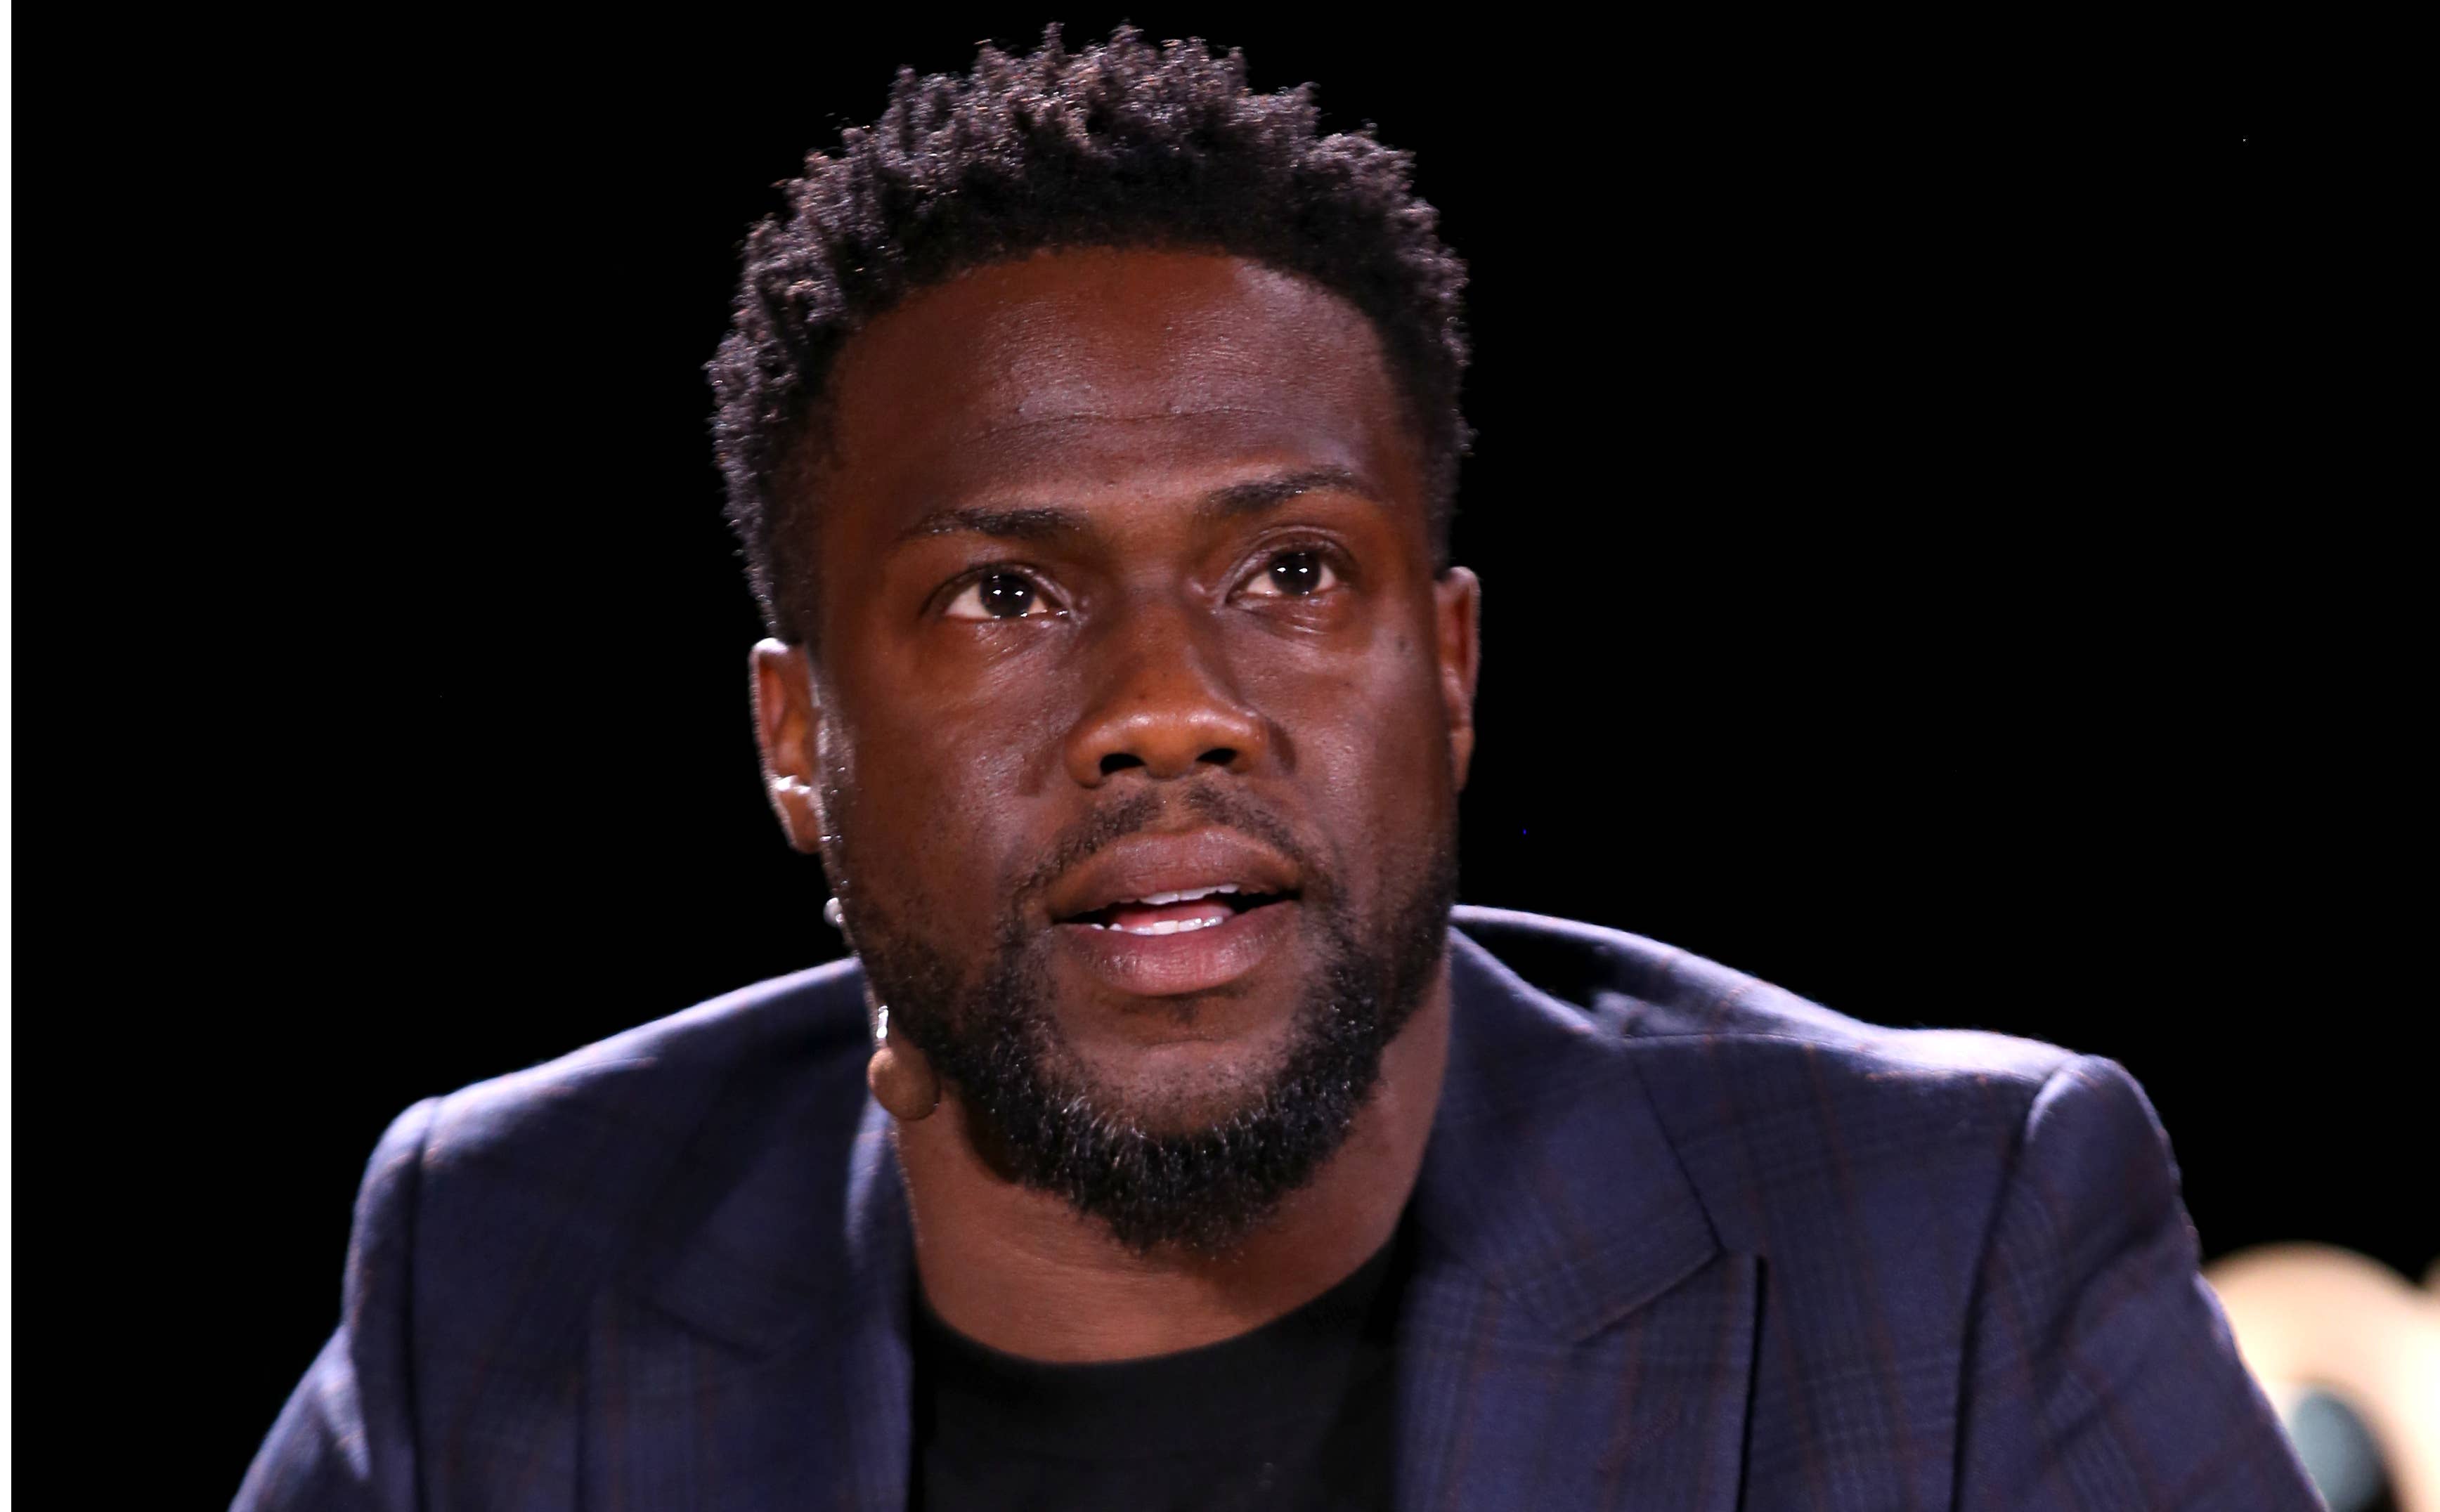 Kevin Hart attends the WSJ Tech D.Live at Montage Laguna Beach